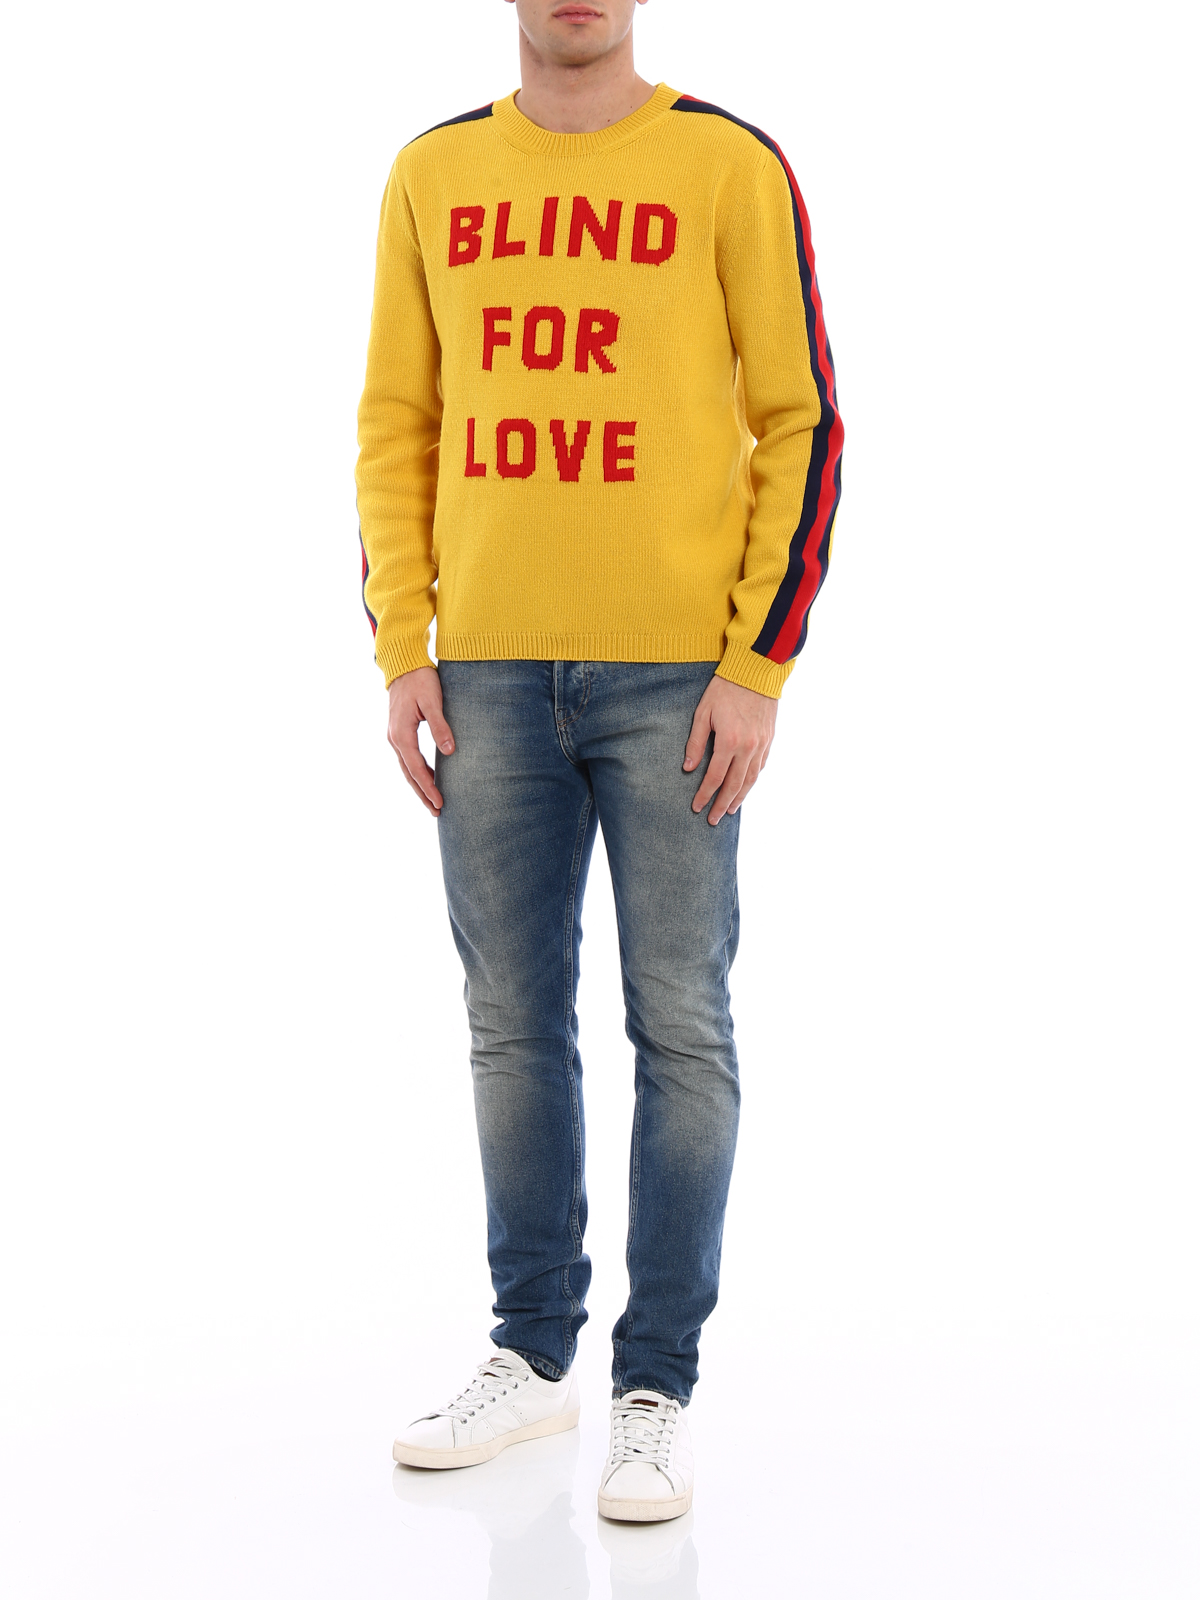 snak at donere Afspejling Crew necks Gucci - Blind for Love intarsia sweater - 496683X9I797566